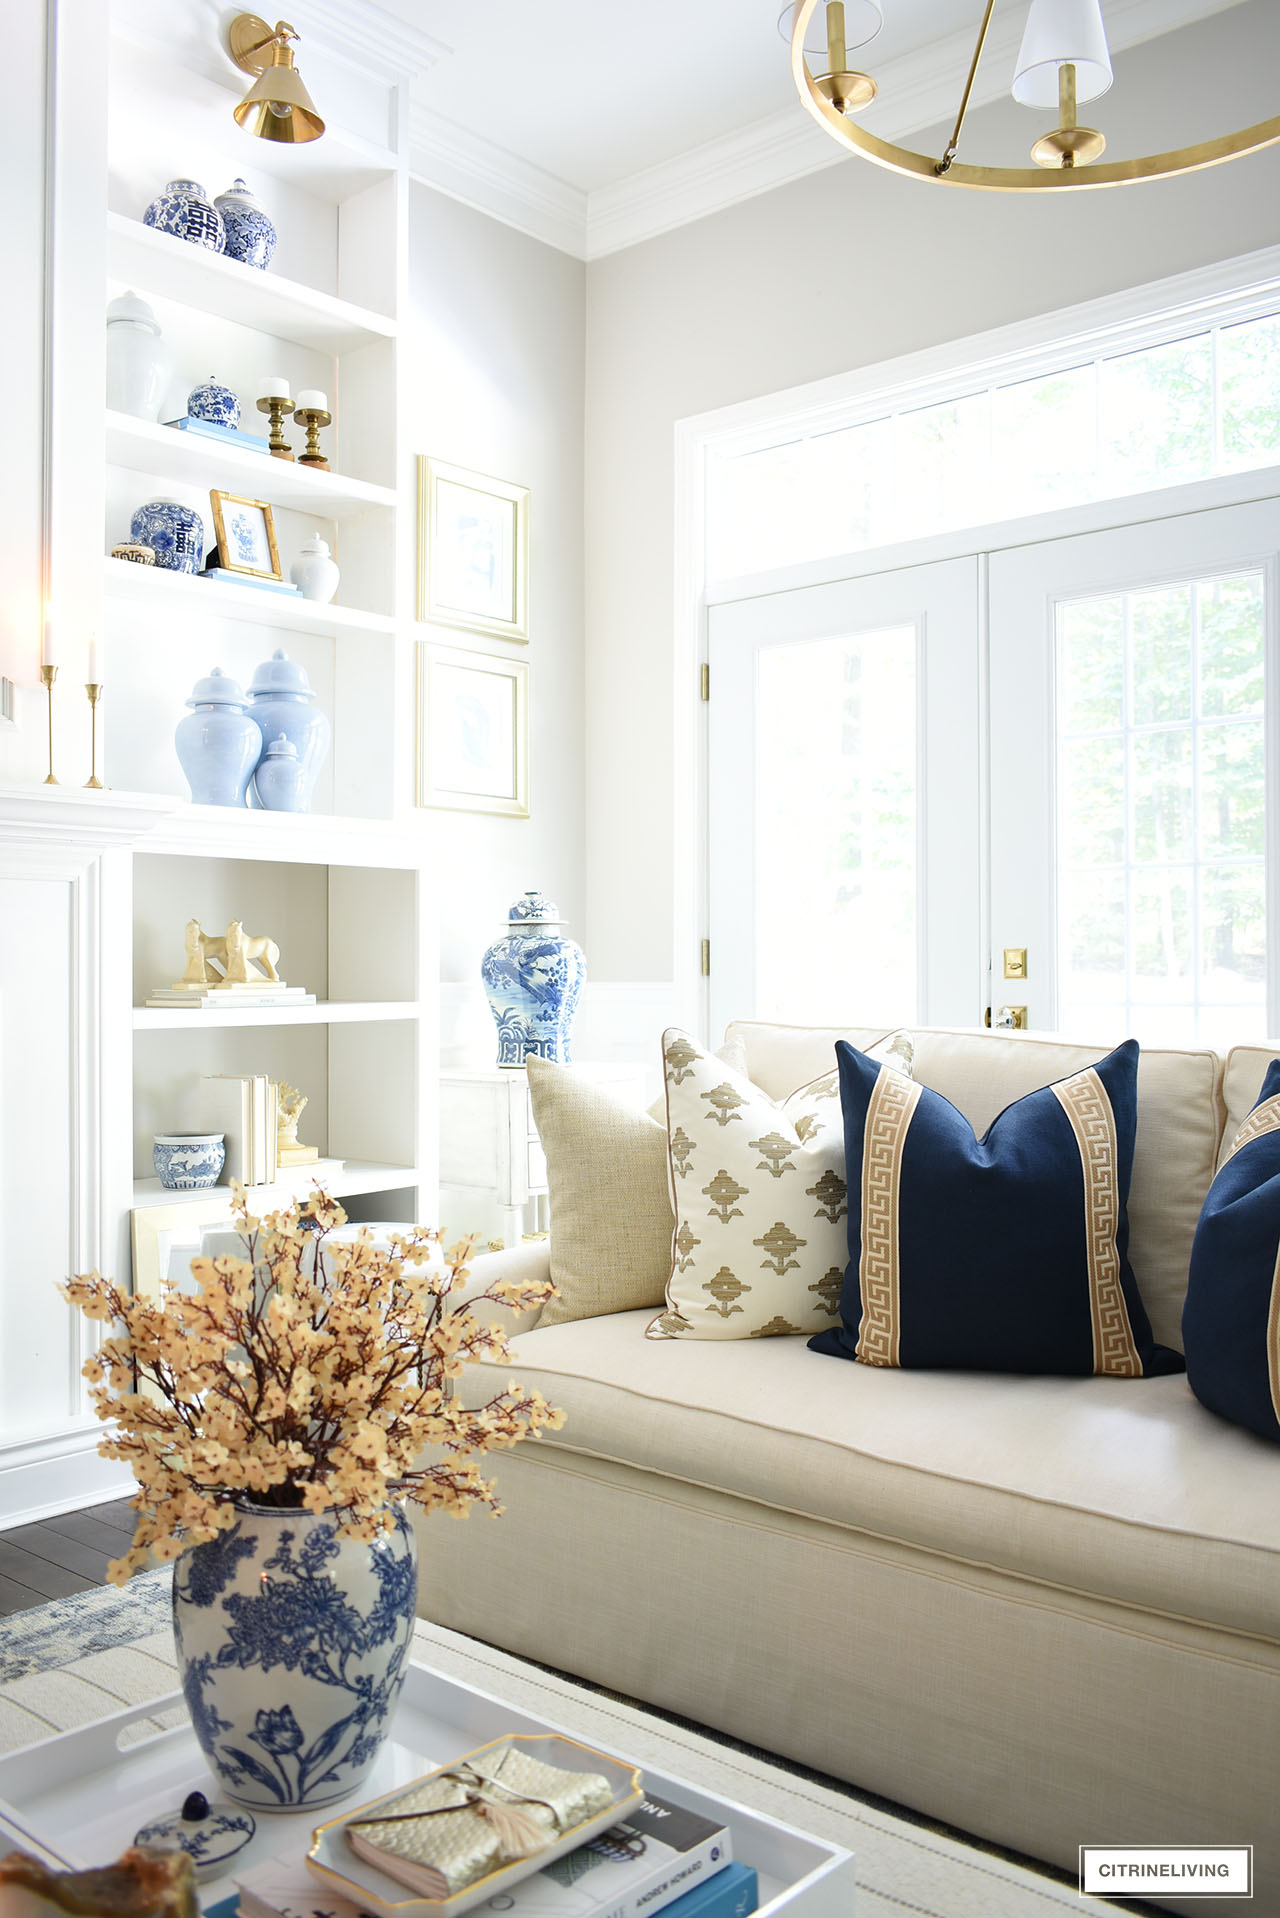 Gorgeous designer throw pillows in navy blue, tan and ivory, styled for fall in an elegant living room, with faux flowers and gold candlesticks.